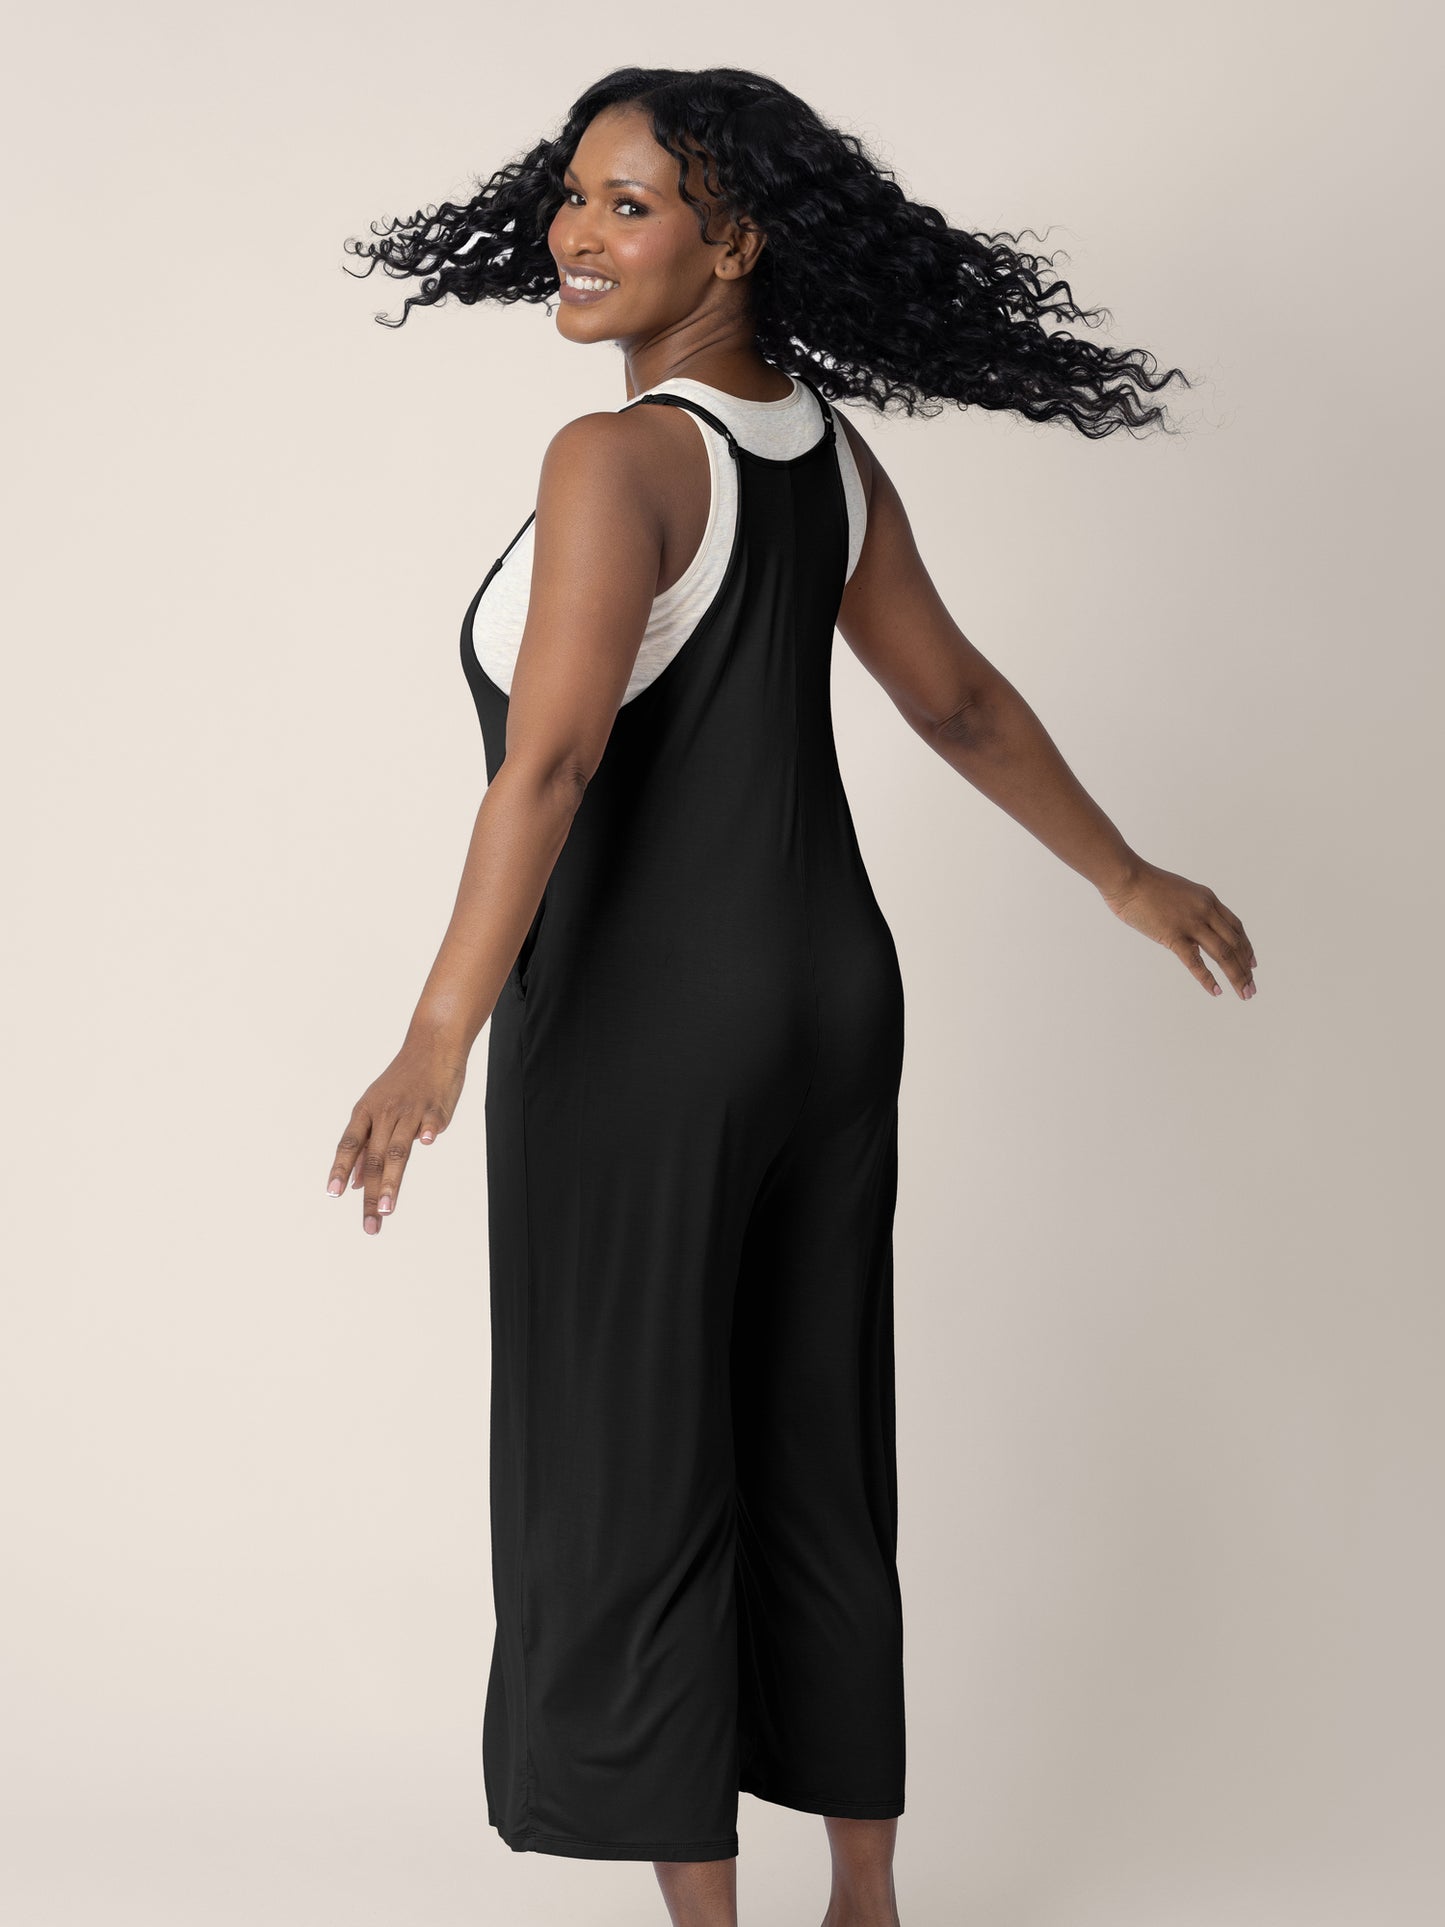 A model wearing the Charlie Maternity & Nursing Romper in Black, giving a spin 